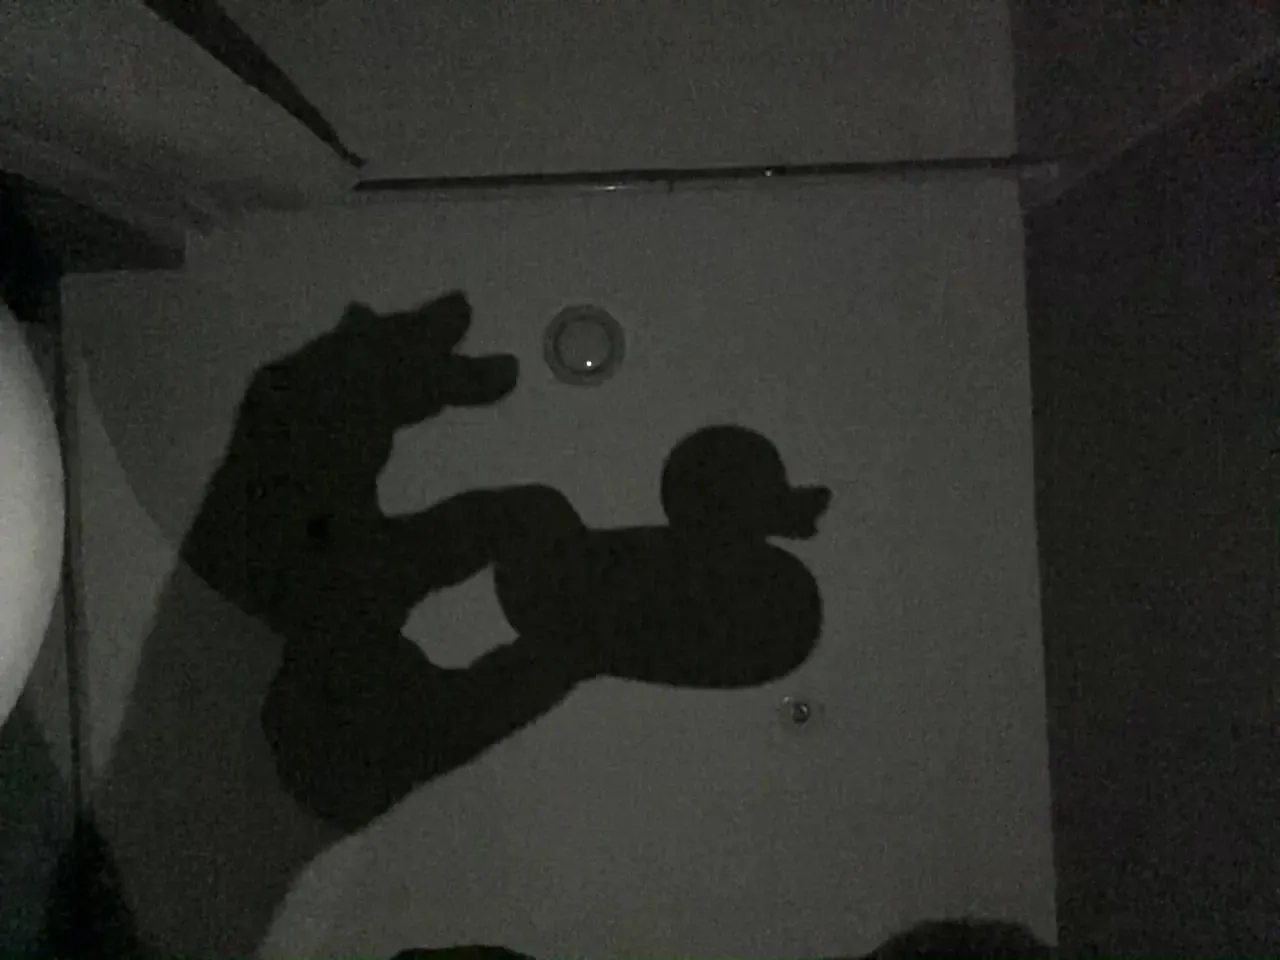 Shadow puppets can make a fun game at home.